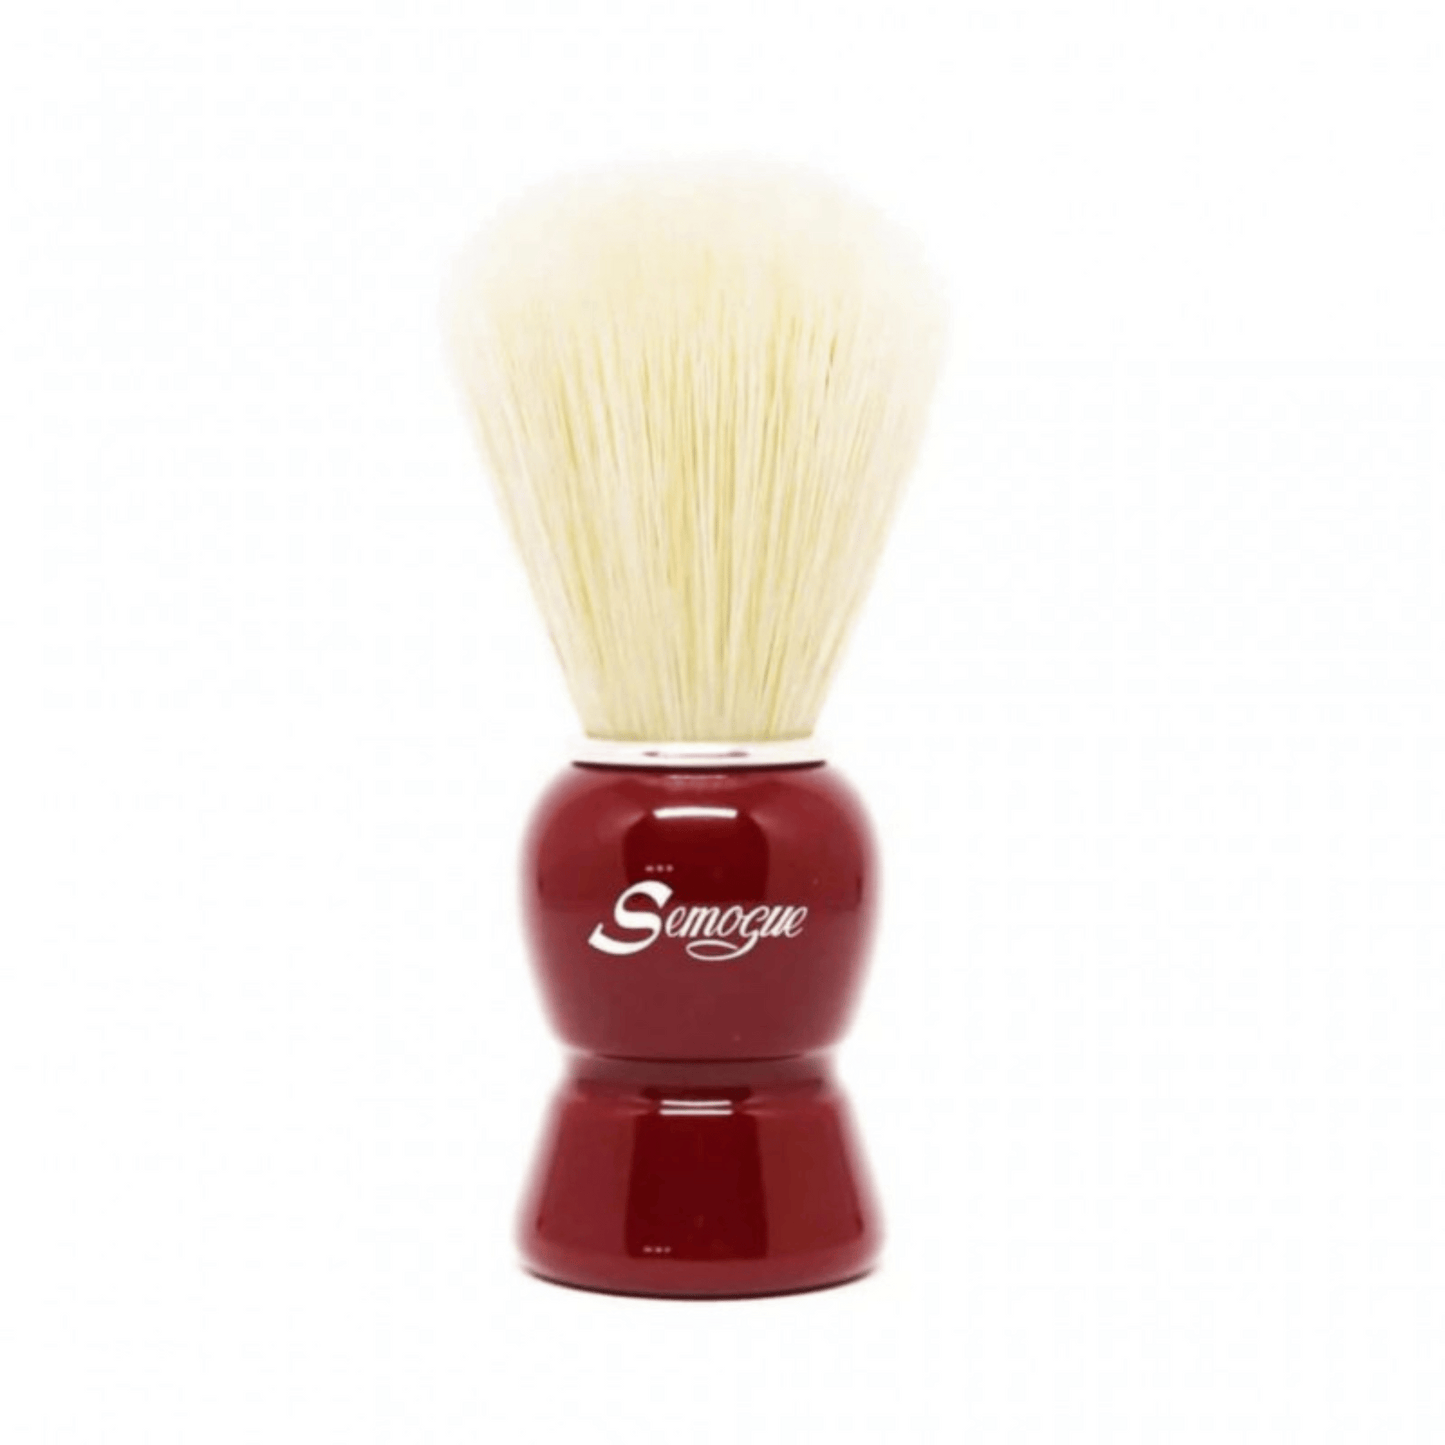 Primary Image of Galahad-C3 Premium Boar Hair Shave Brush with Imperial Red Handle